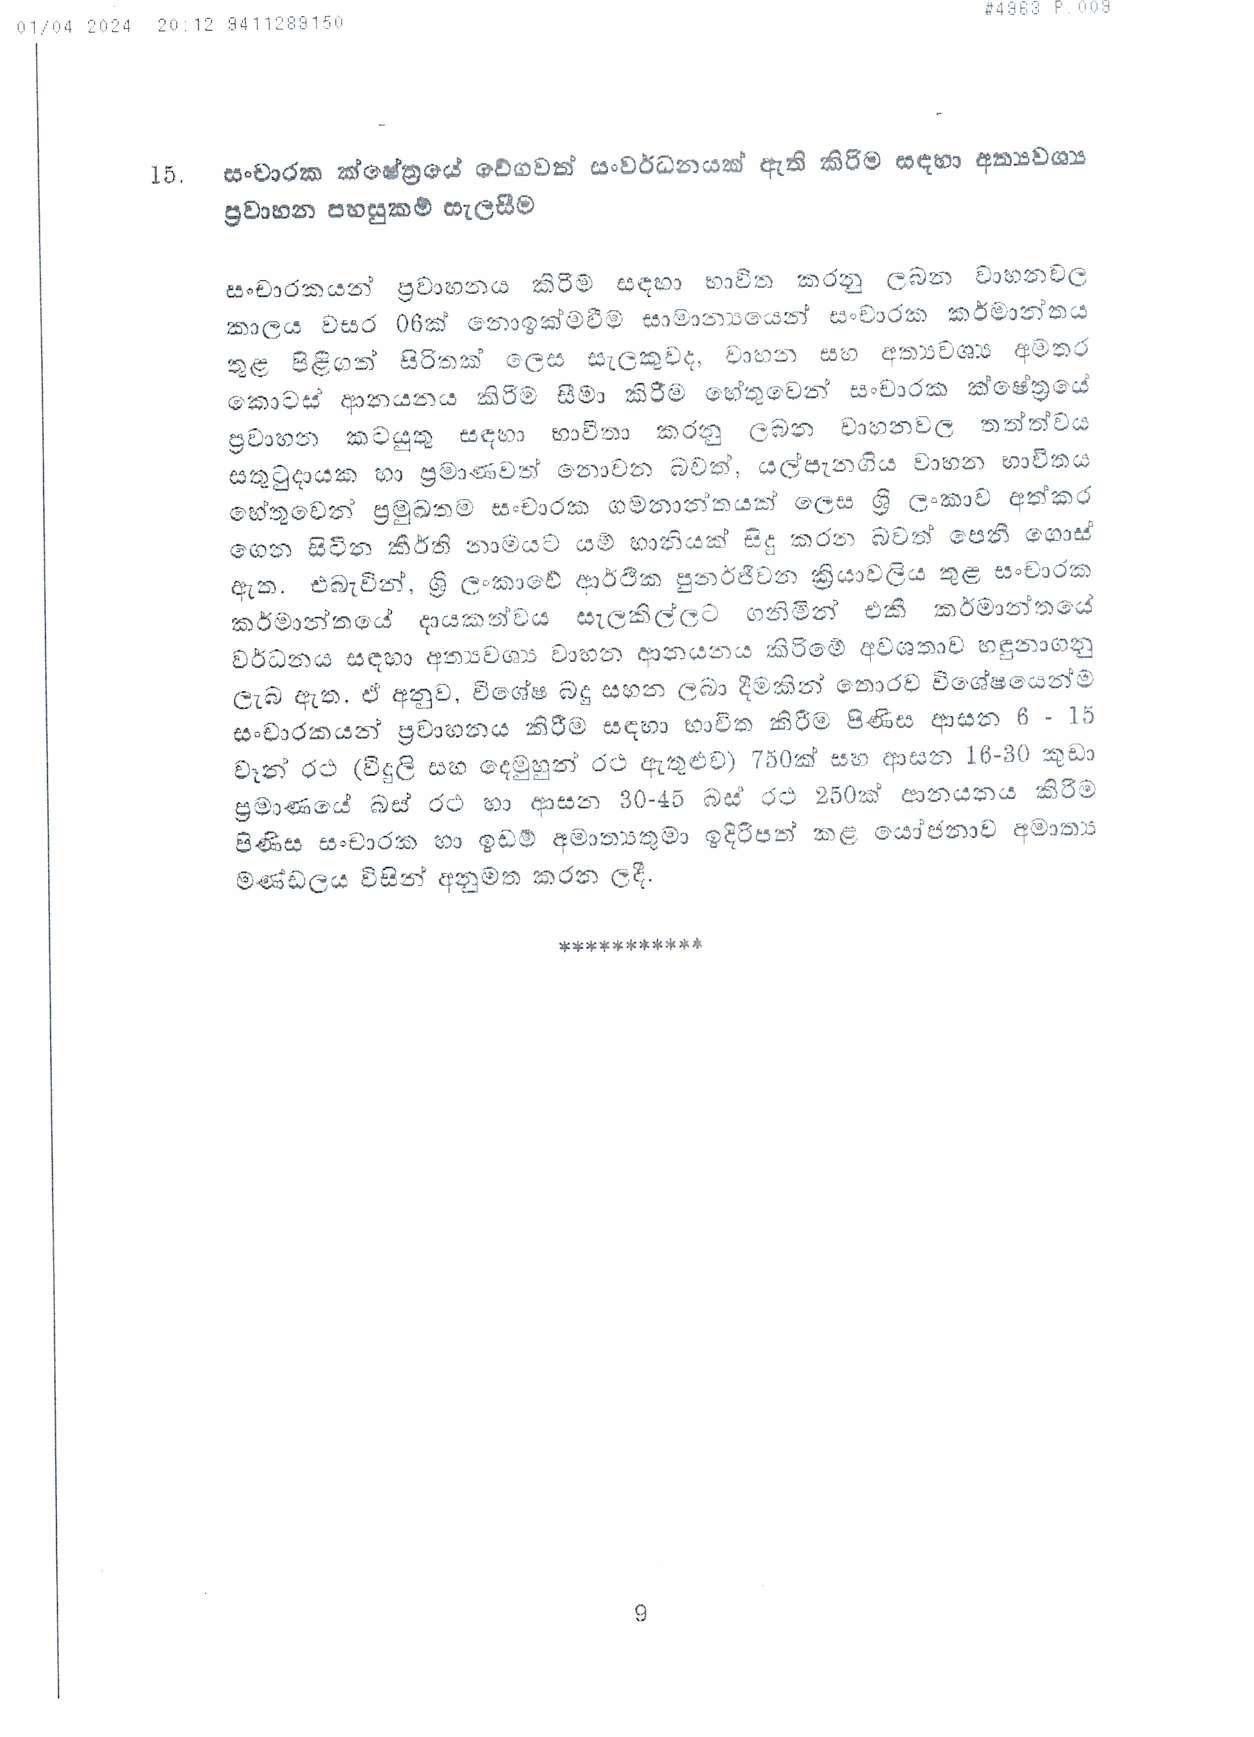 Cabinet Decisions on 01.04.2024 compressed page 0009